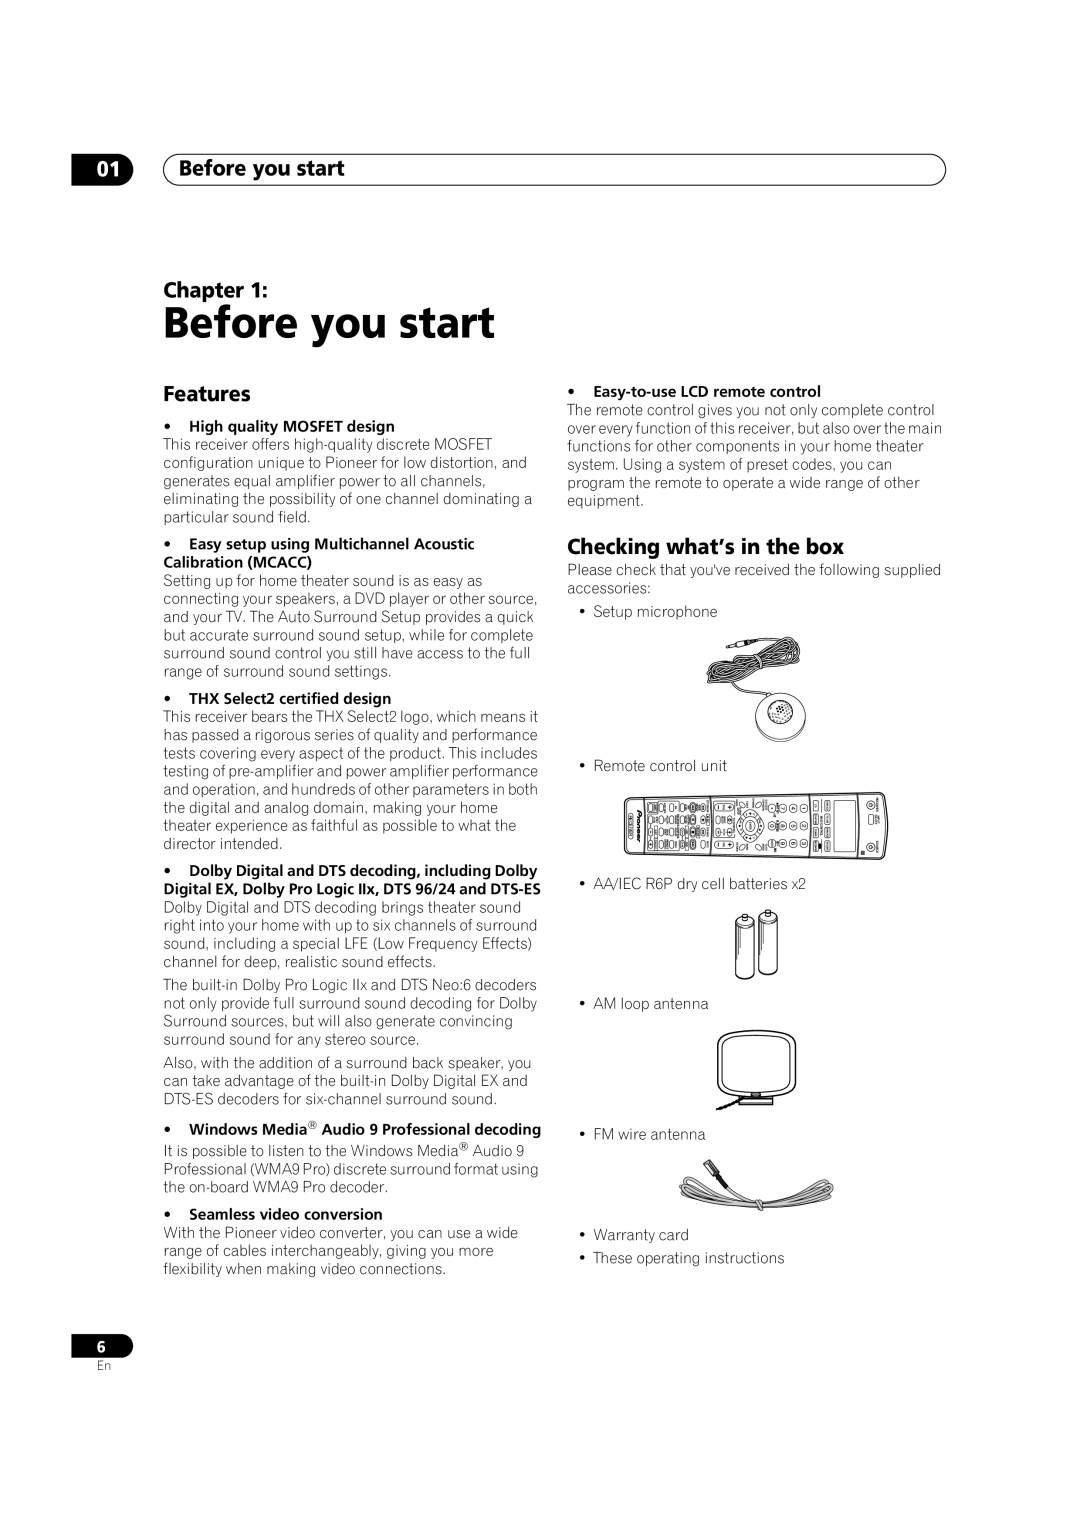 Pioneer VSX-1015TX operating instructions 01Before you start Chapter, Features, Checking what’s in the box 